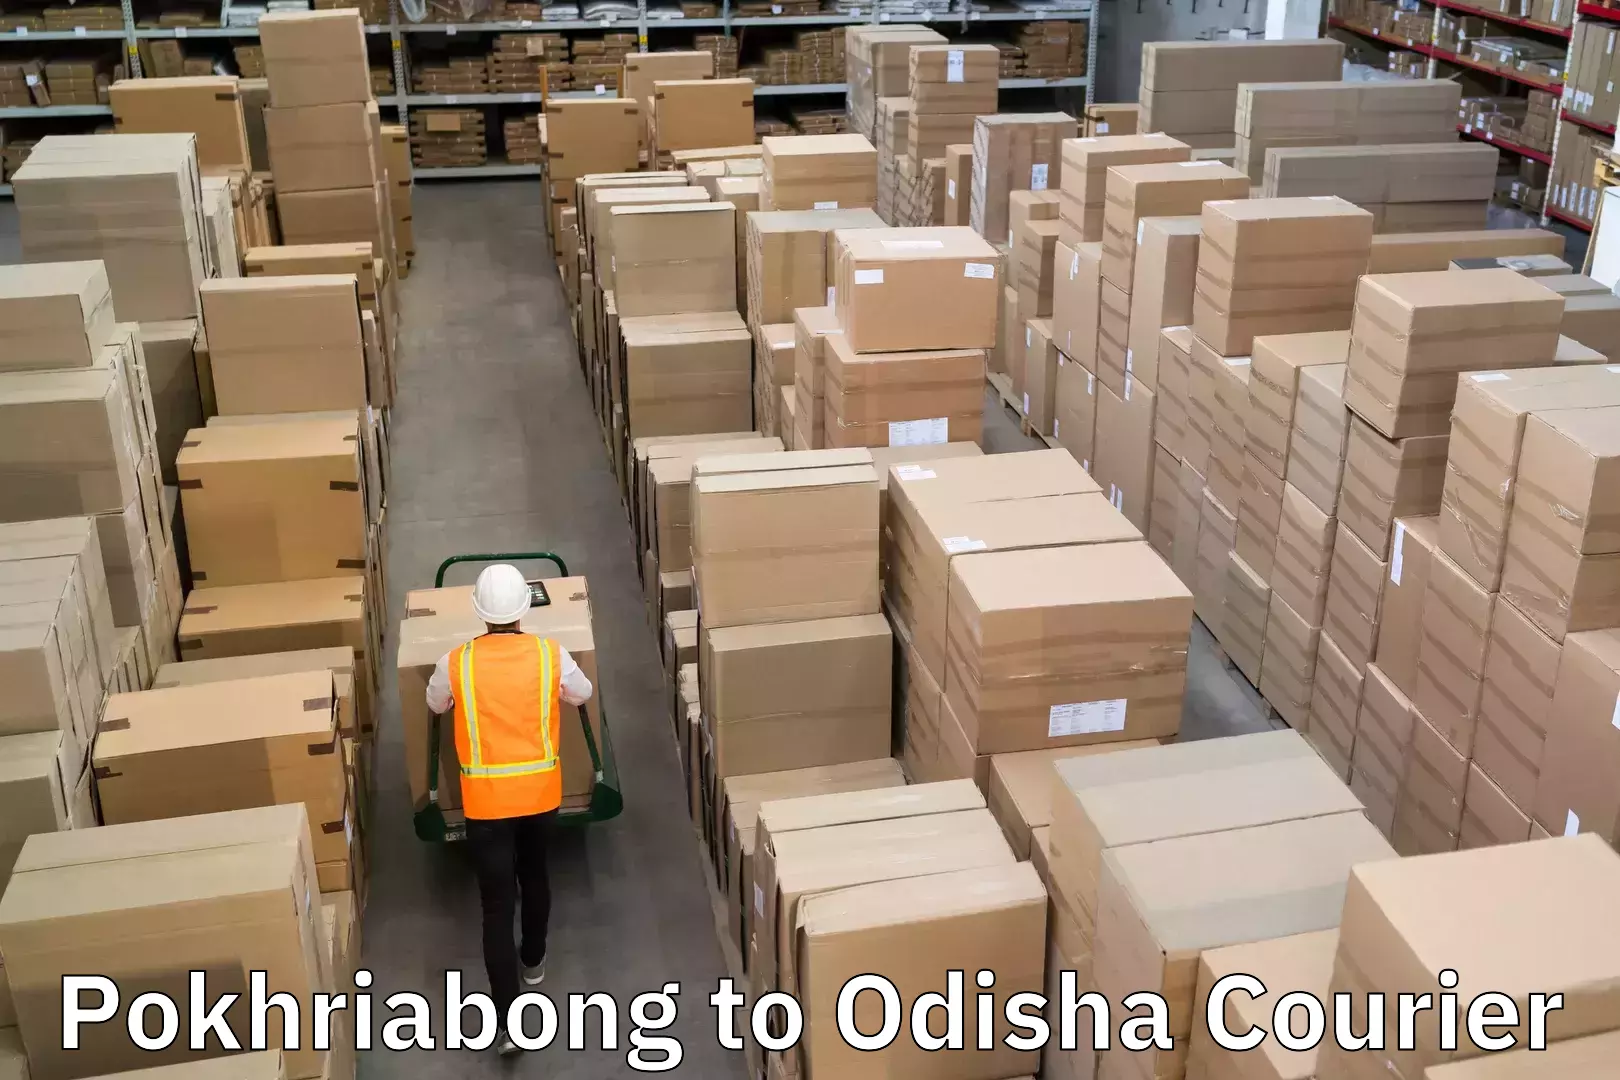 Express delivery capabilities in Pokhriabong to Odisha